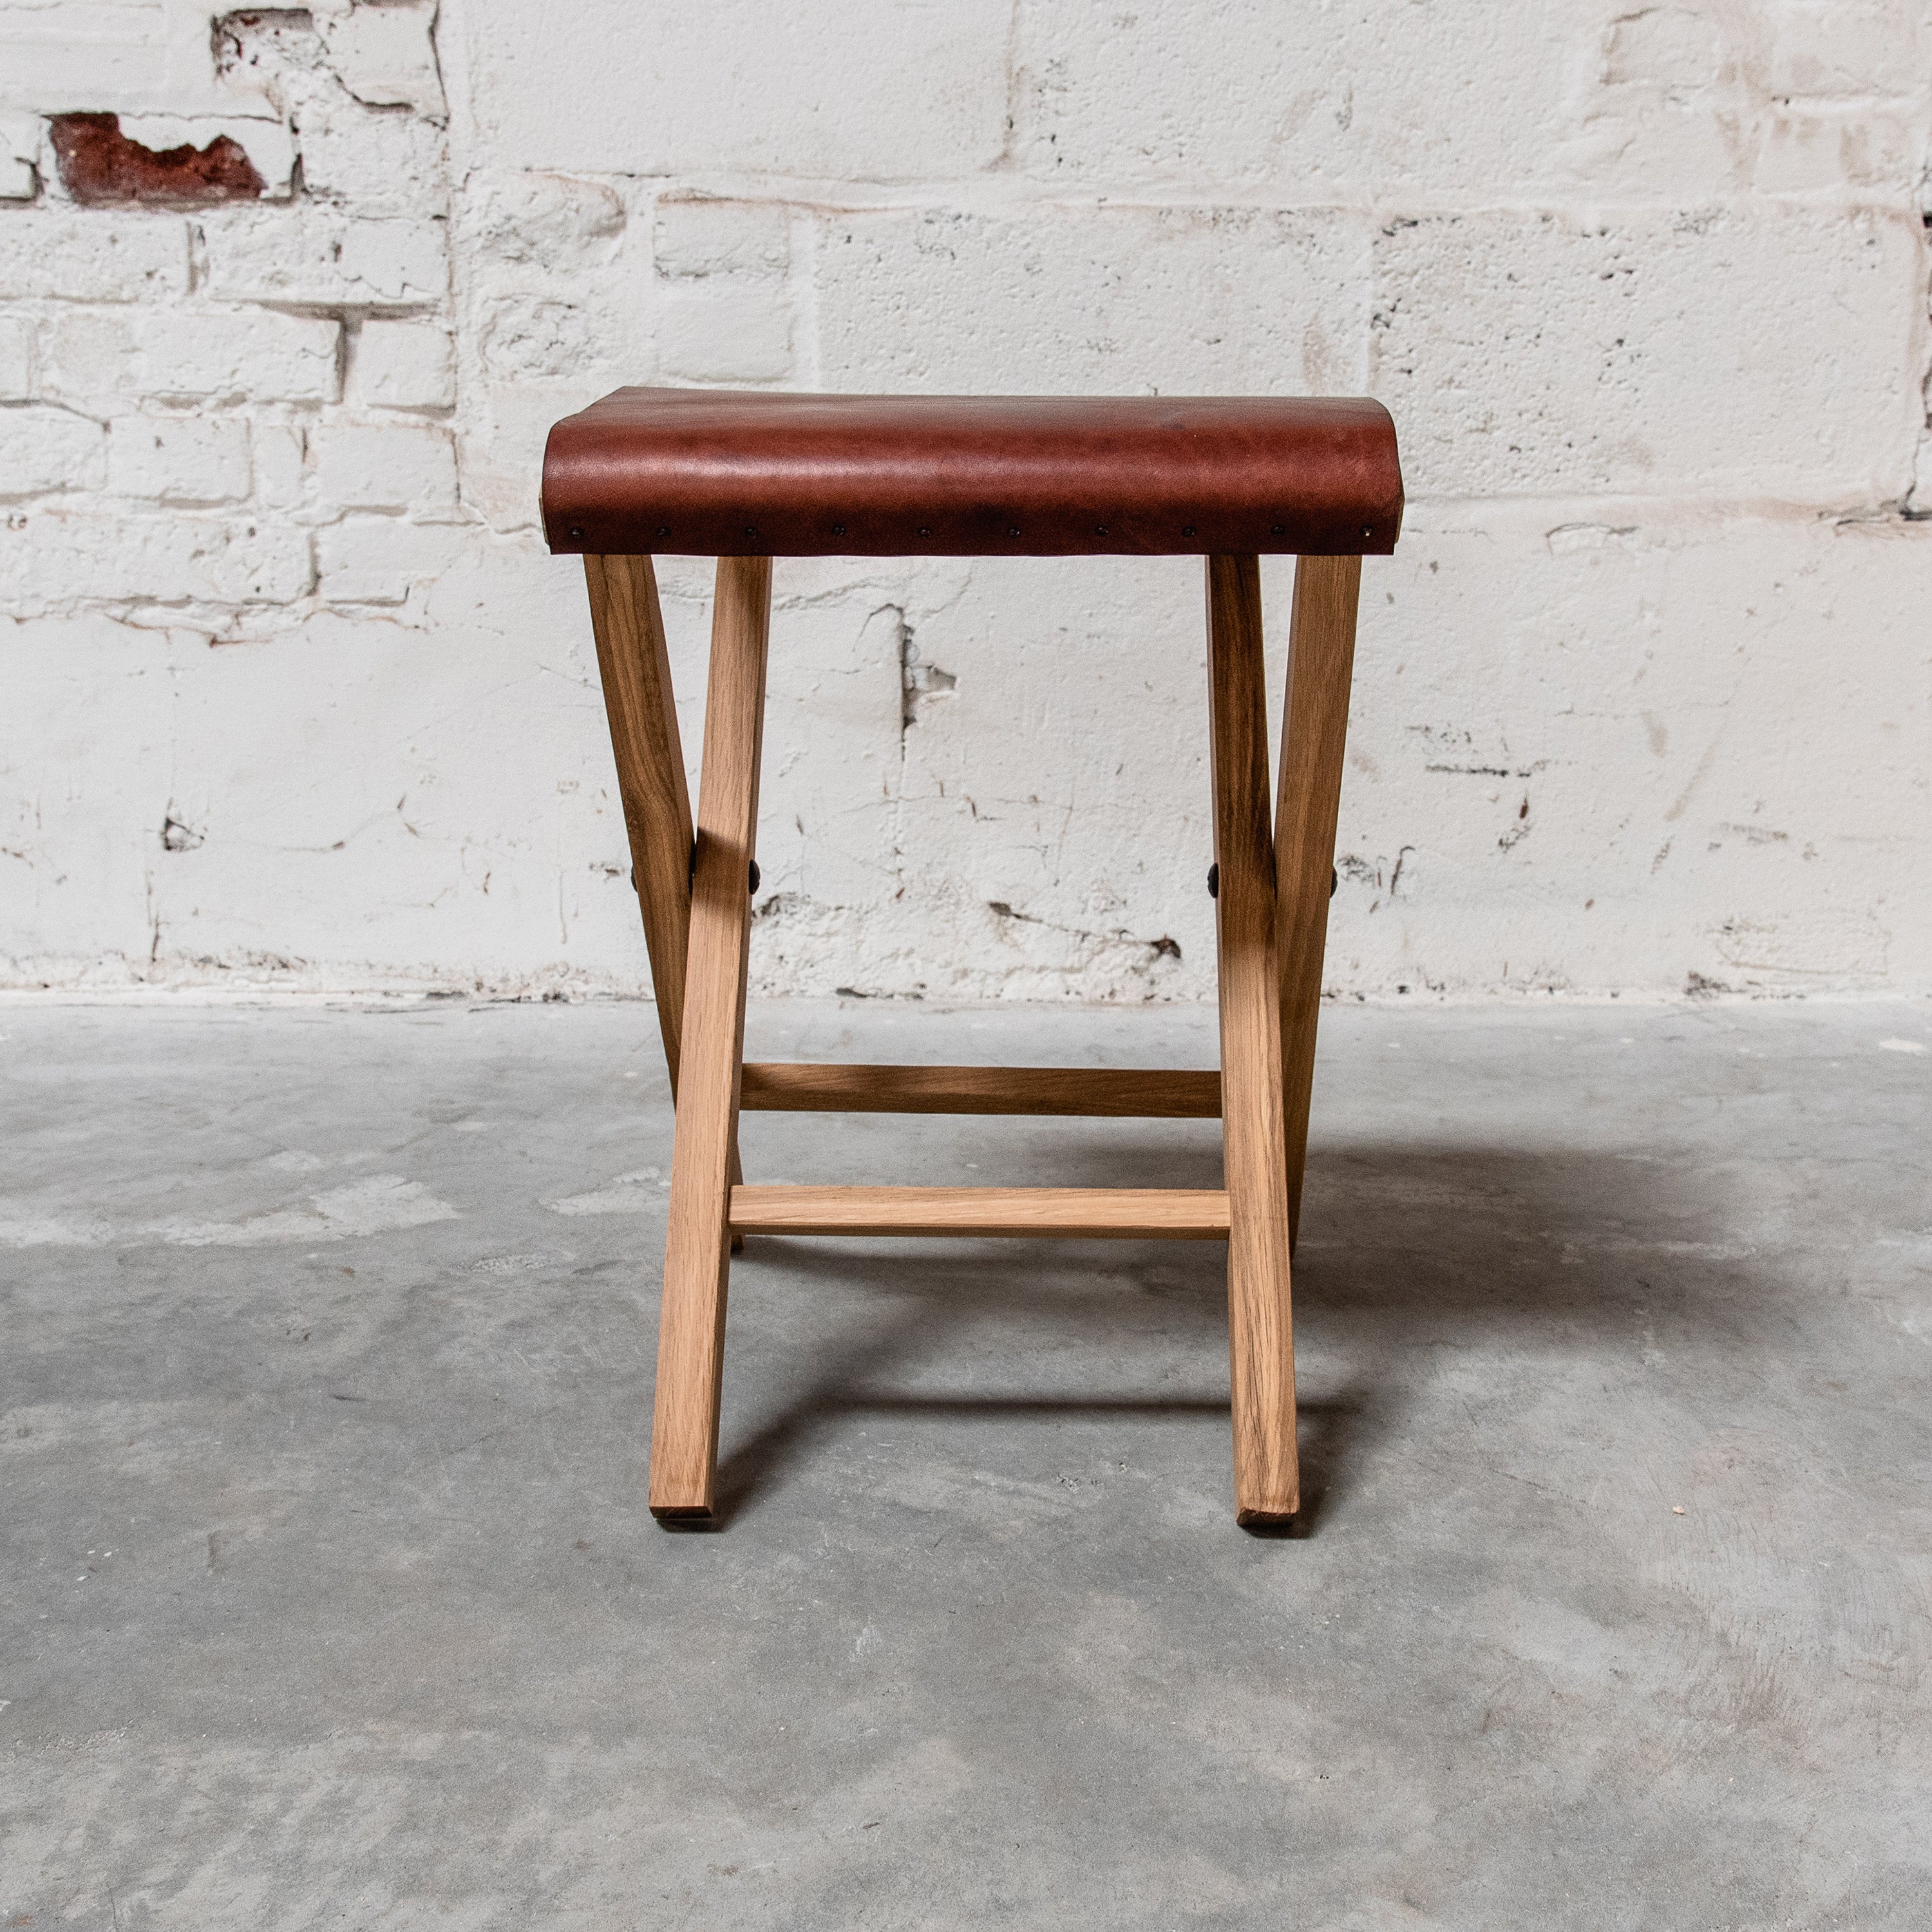 Lewis and Clark Expedition Stool